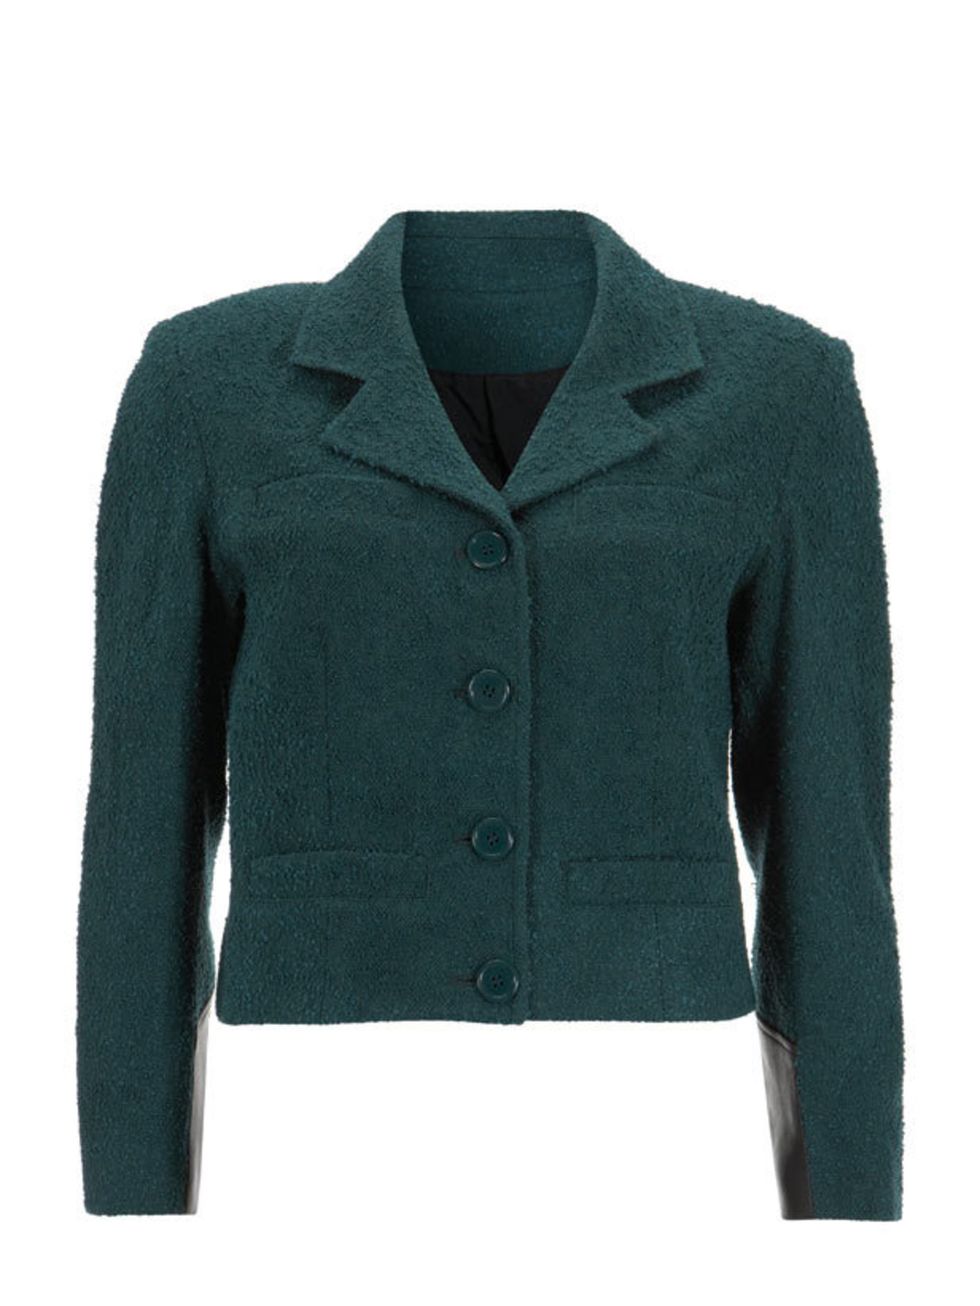 <p>Topshop cropped jacket, £55, for stockists call 0845 121 4519</p>